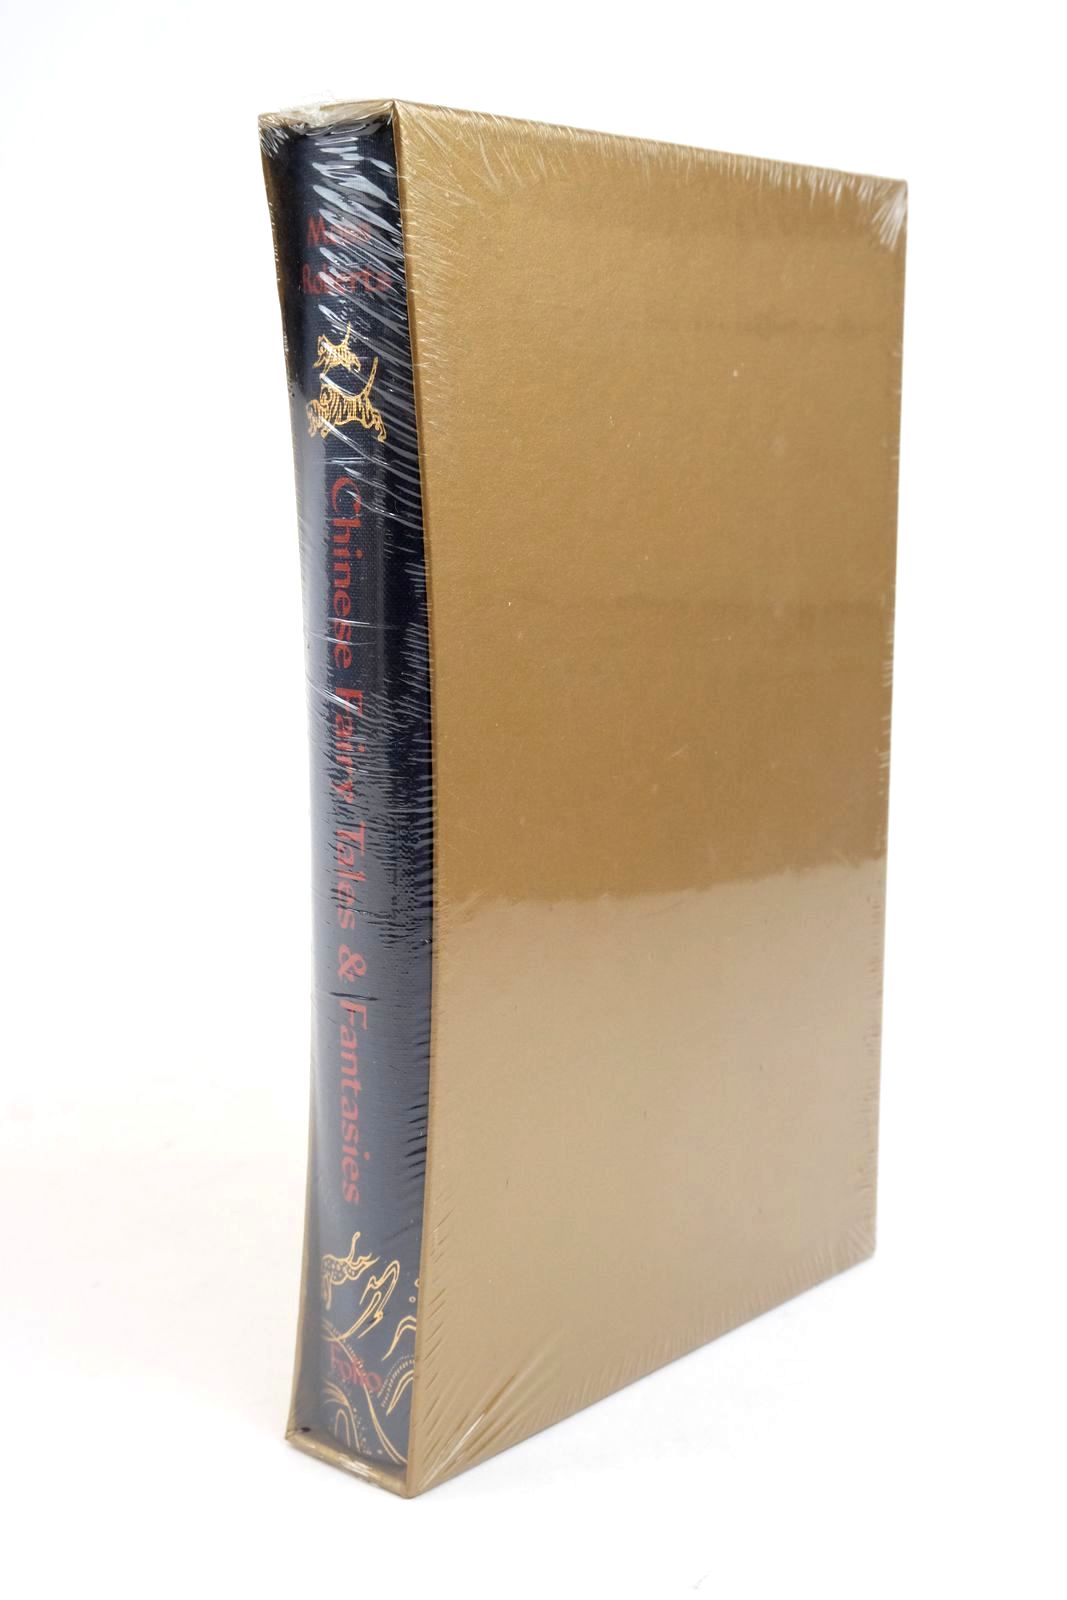 Photo of CHINESE FAIRY TALES AND FANTASIES written by Roberts, Moss illustrated by Ngai, Victo published by Folio Society (STOCK CODE: 1321960)  for sale by Stella & Rose's Books